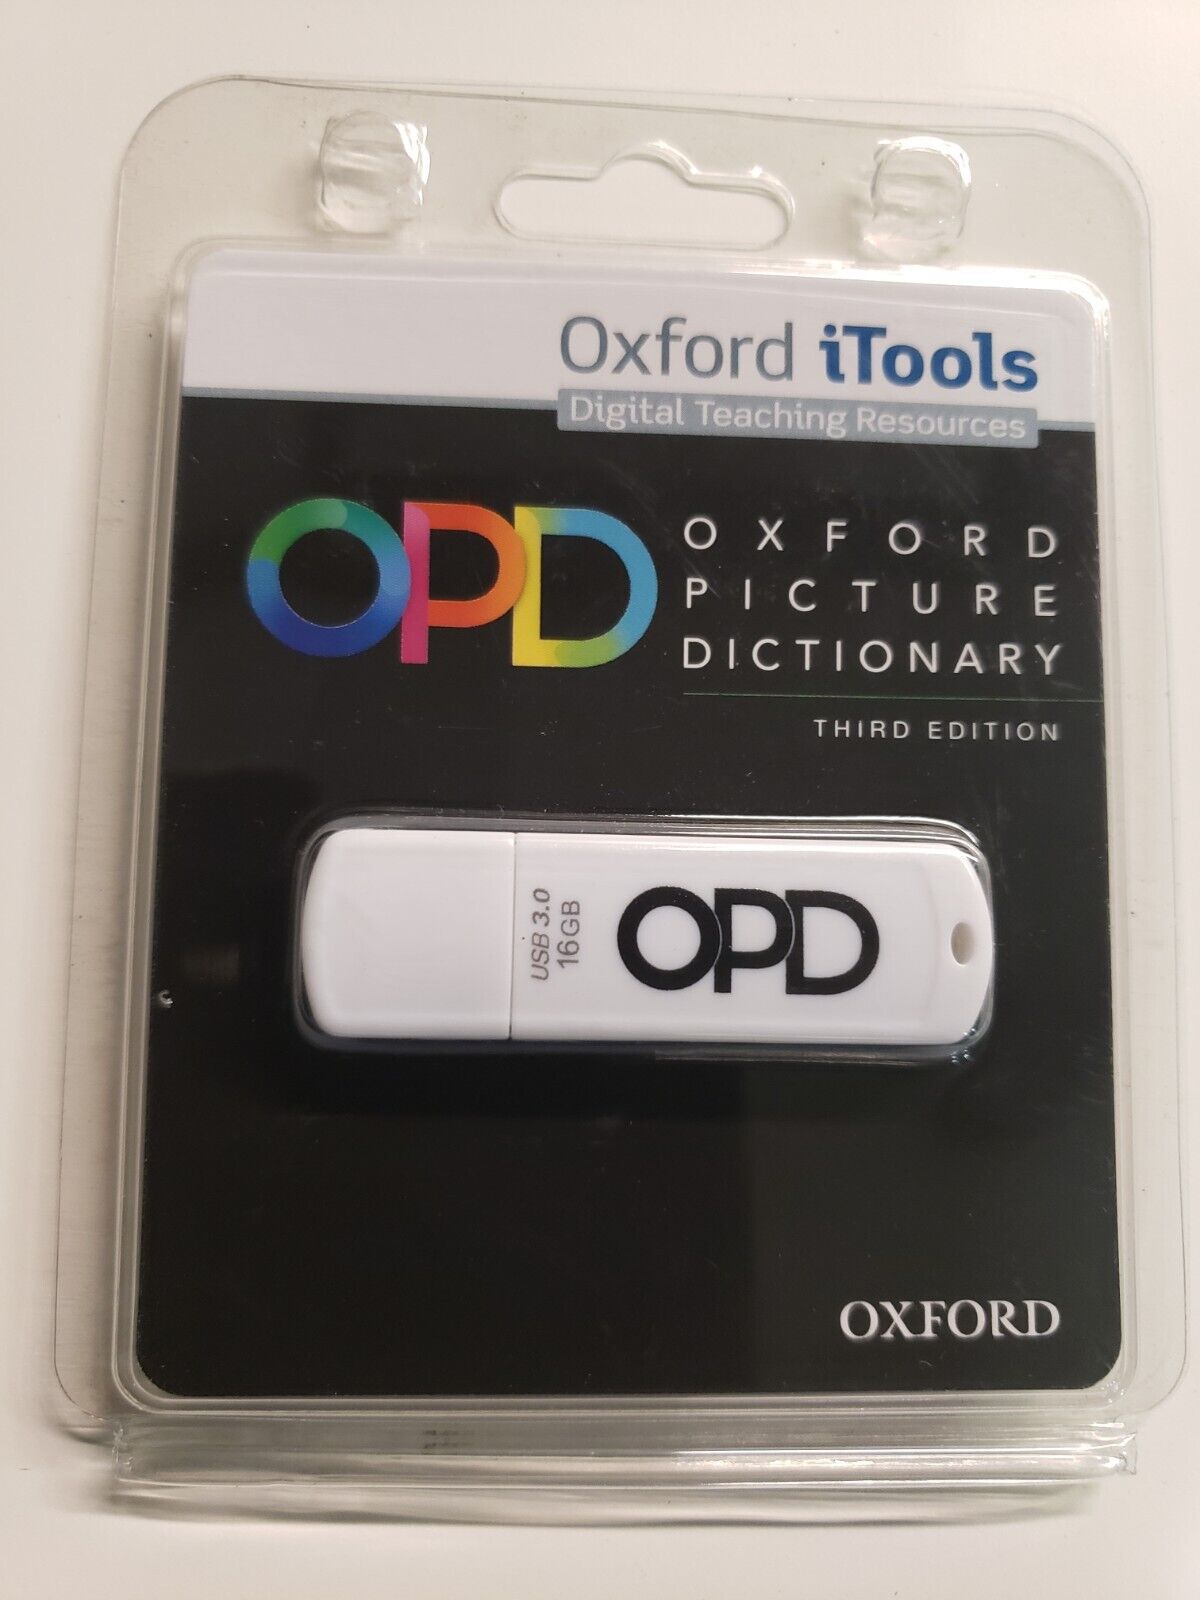 Oxford iTools OPD Picture Dictionary on 16GB USB 3.0 Flash Drive.  ( NEW )